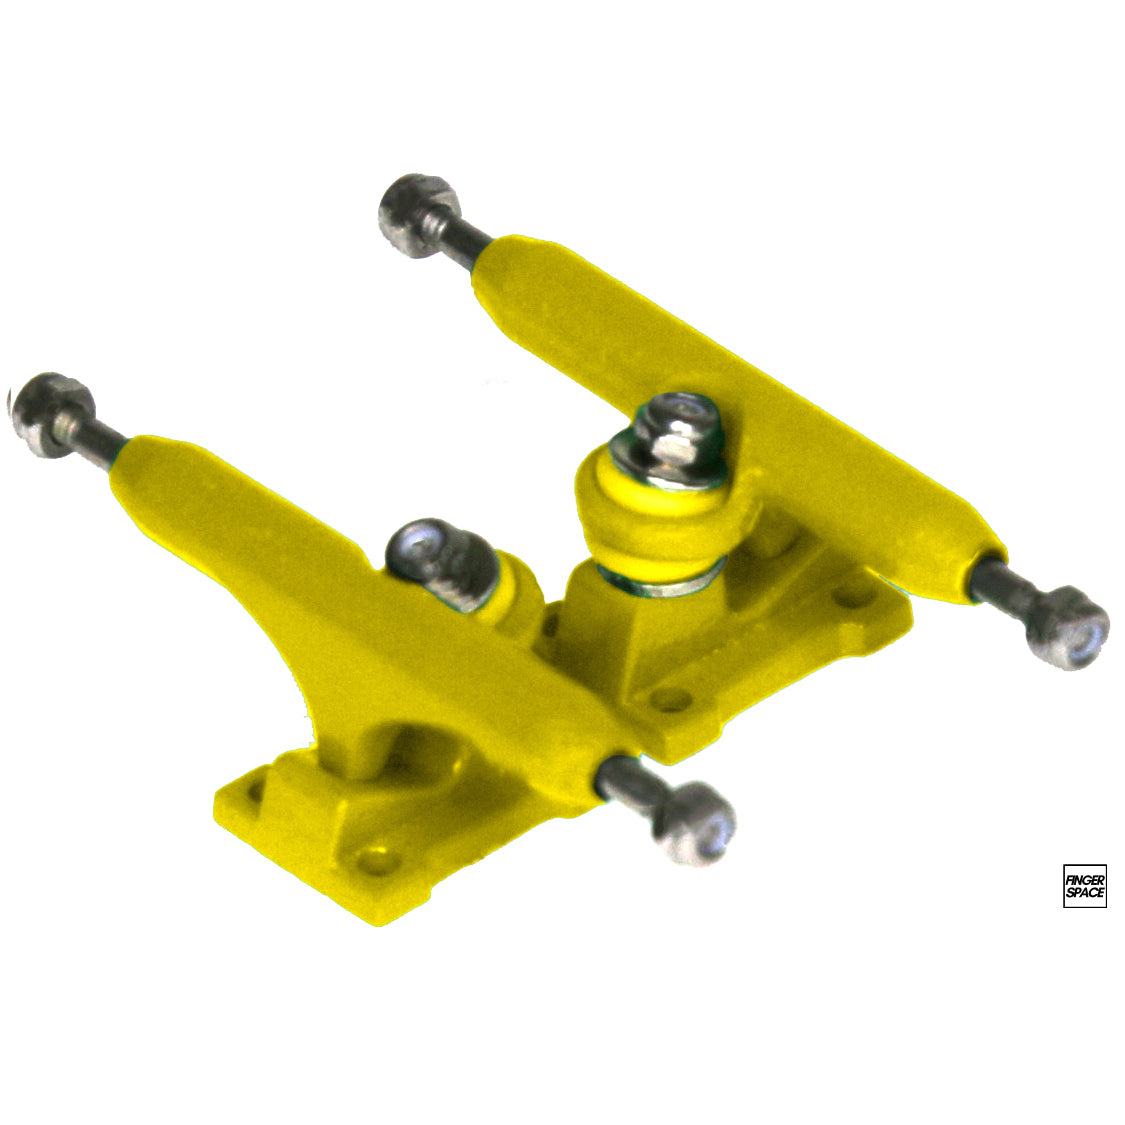 34mm Pro Space Trucks - "Tuscan Yellow" Colorway